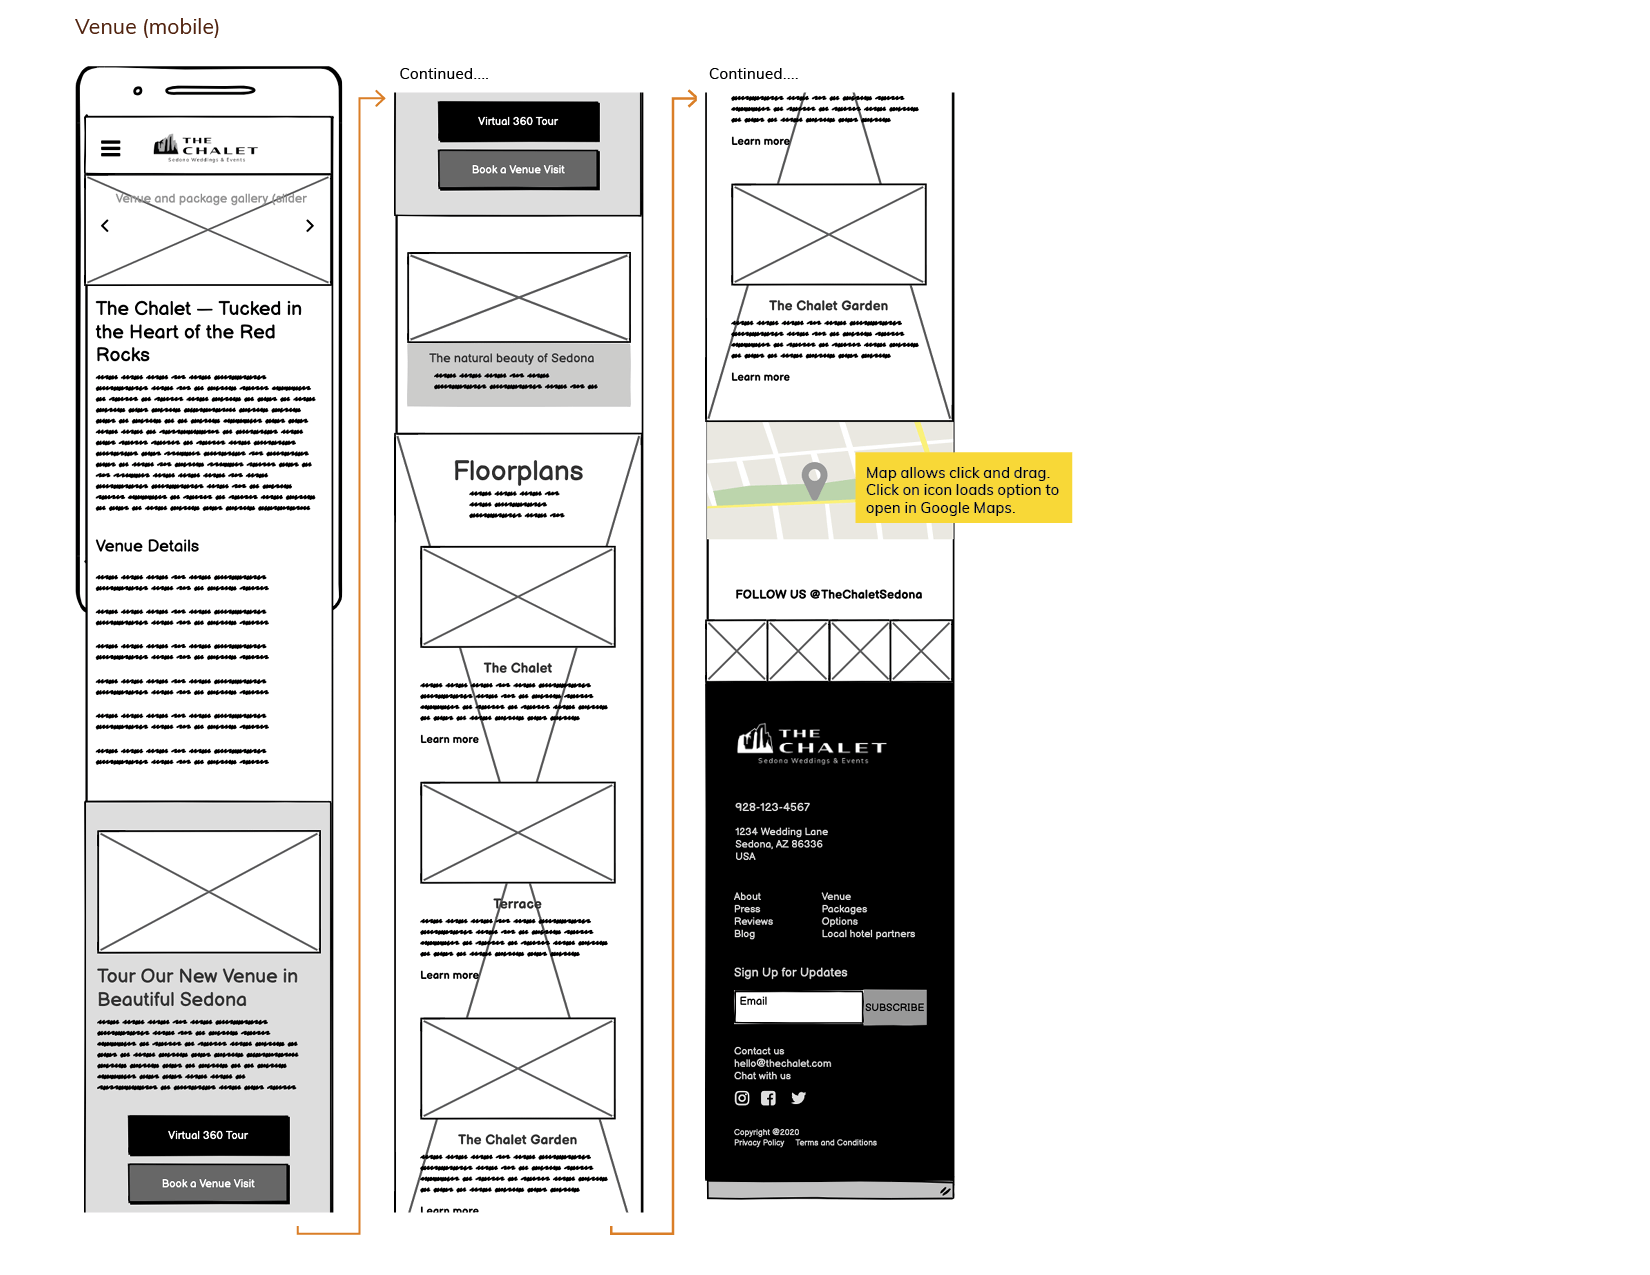 The Chalet wireframe - Venue page, mobile